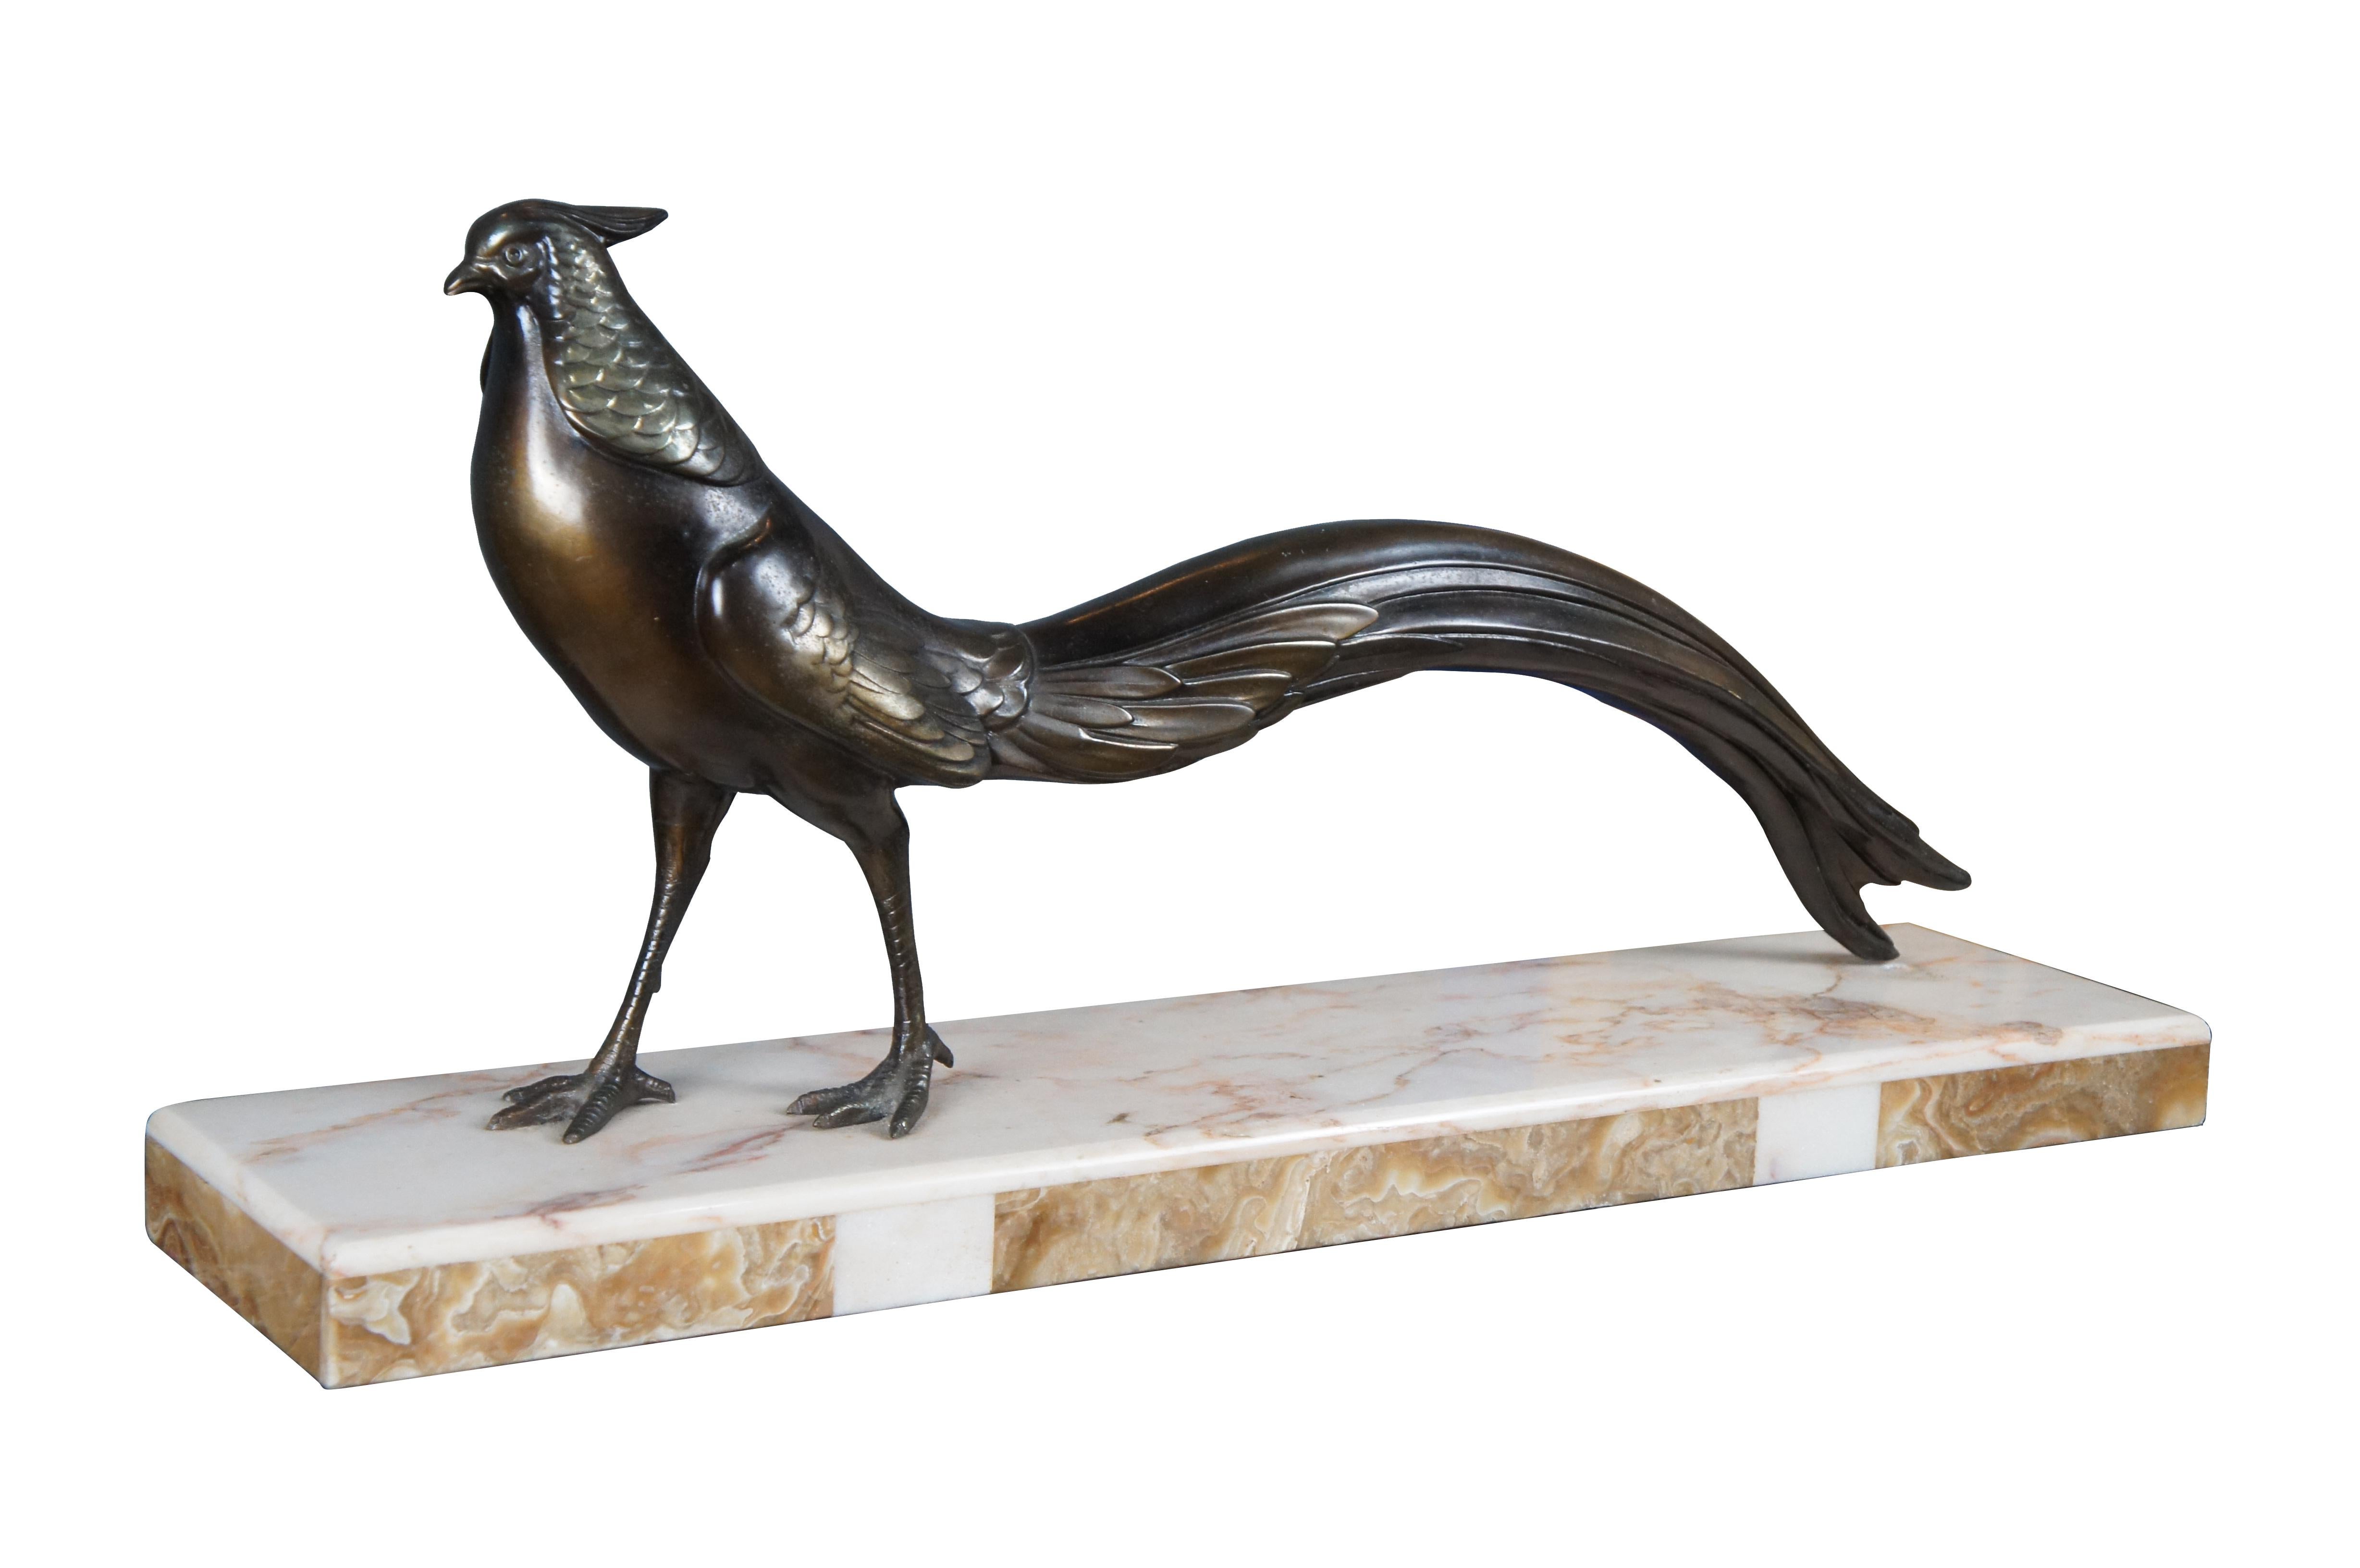 An exception French Art Deco Bronze Statue of Pheasant on Marble Base, circa 1920s. Features the flamboyant bird in a more relaxed mood, perhaps scouting for food while keeping a wary eye. Such a depiction was in keeping with the sleek, modernistic